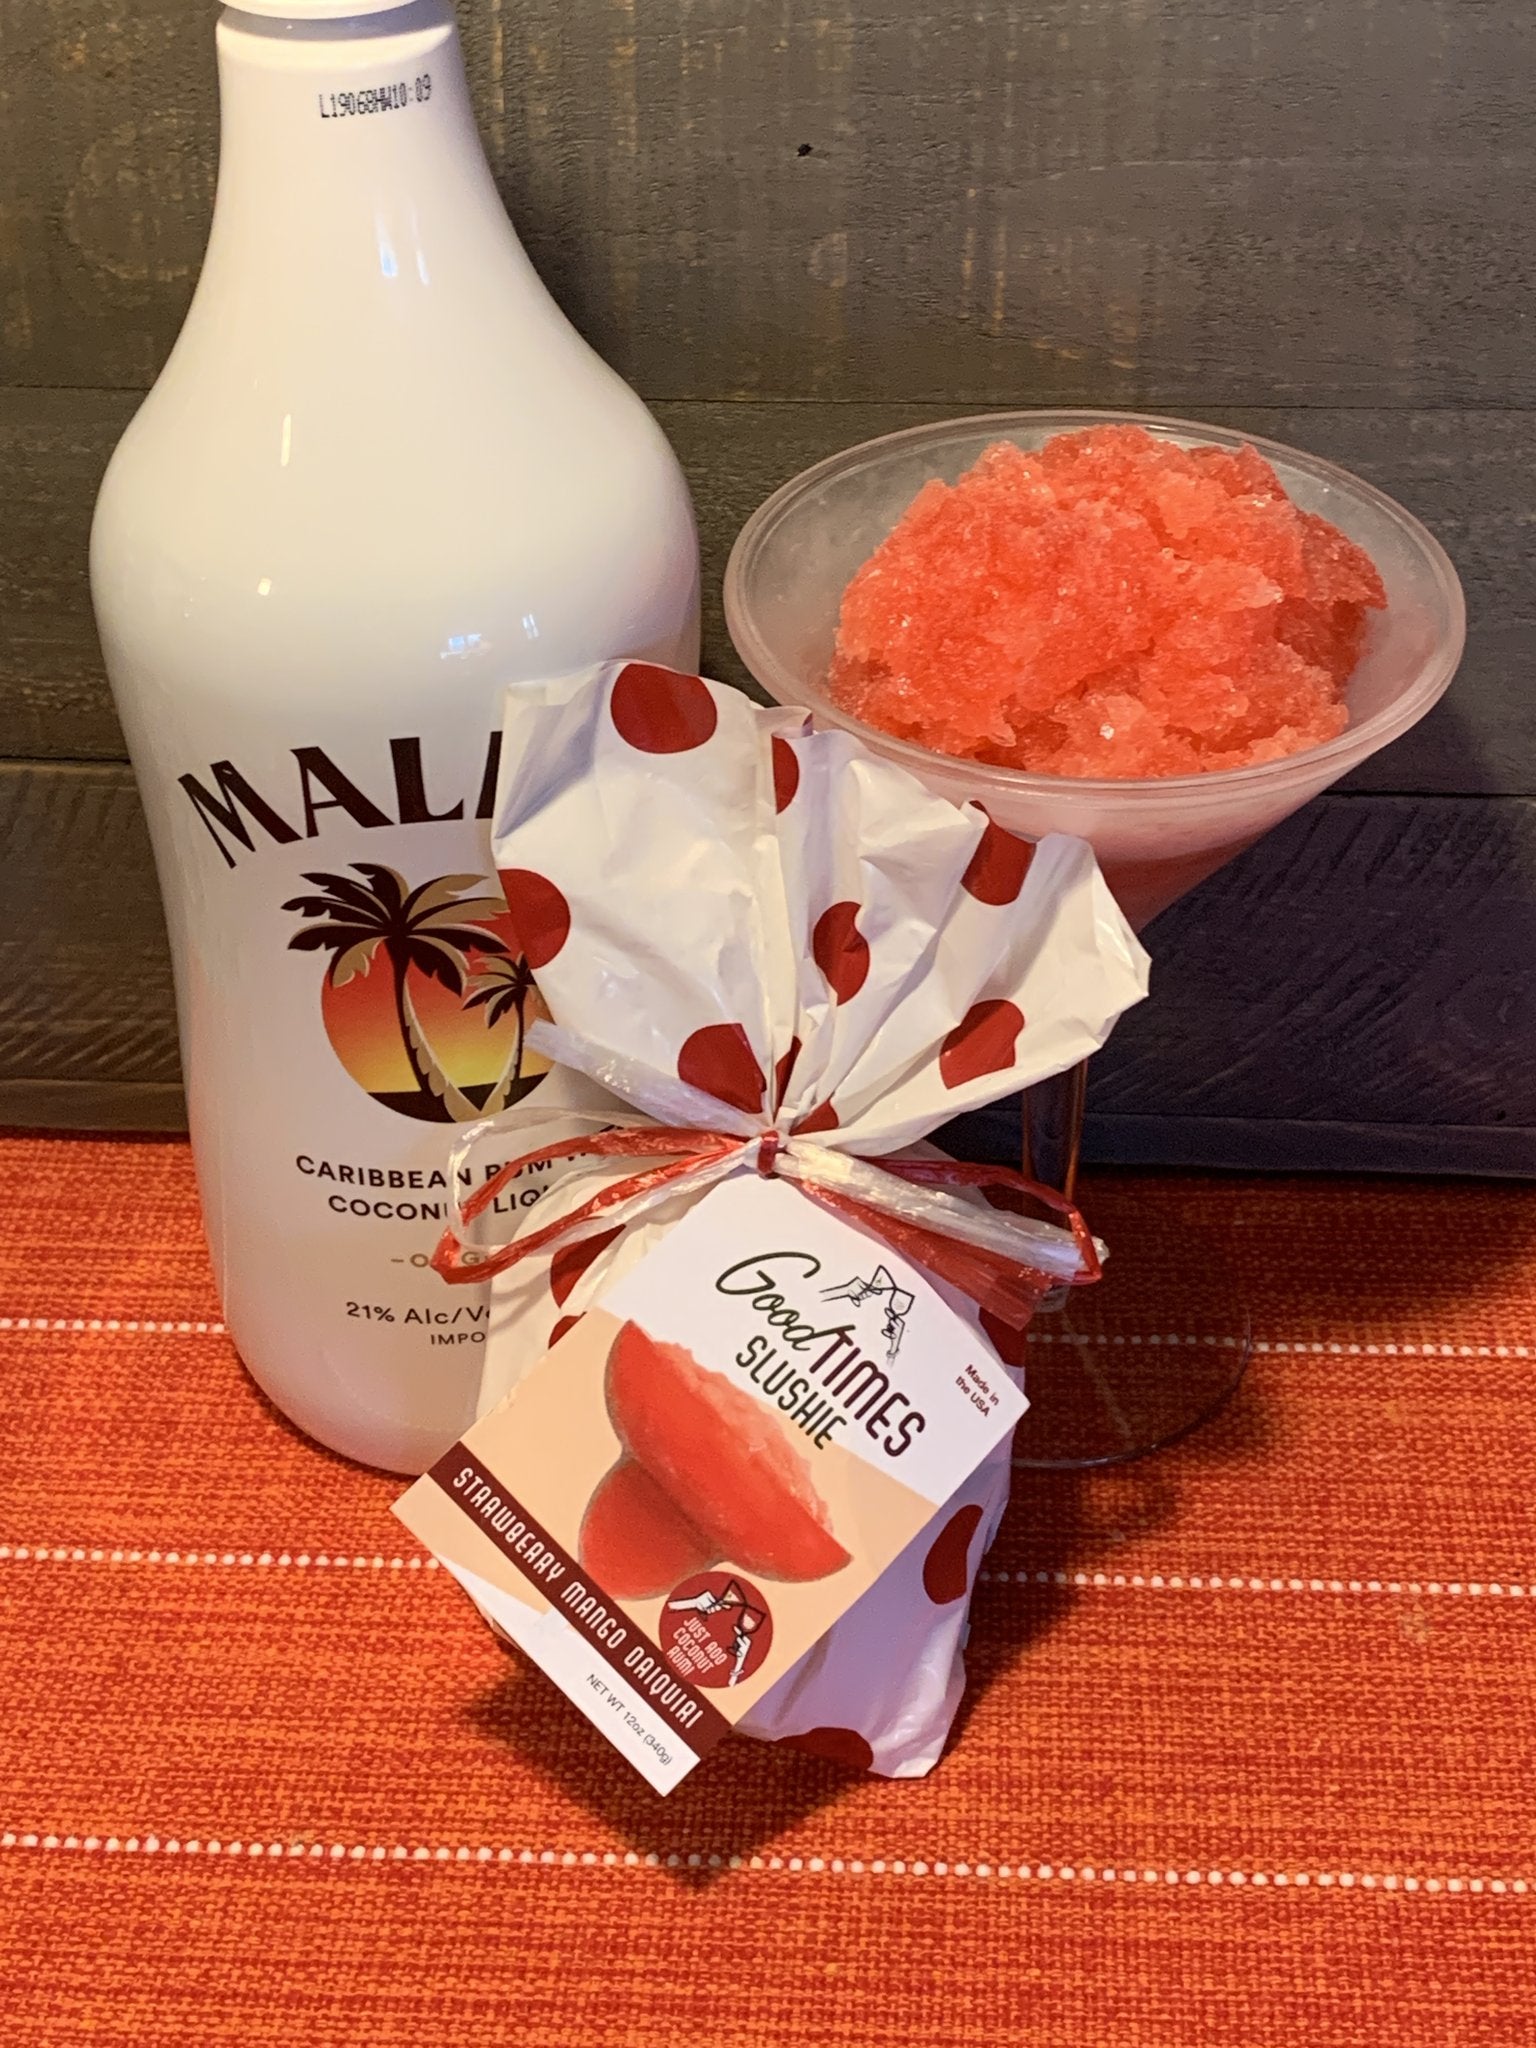 strawberry mango daiquiri slushie displayed in a glass next to the package and bottle of rum on a rust colored tablecloth